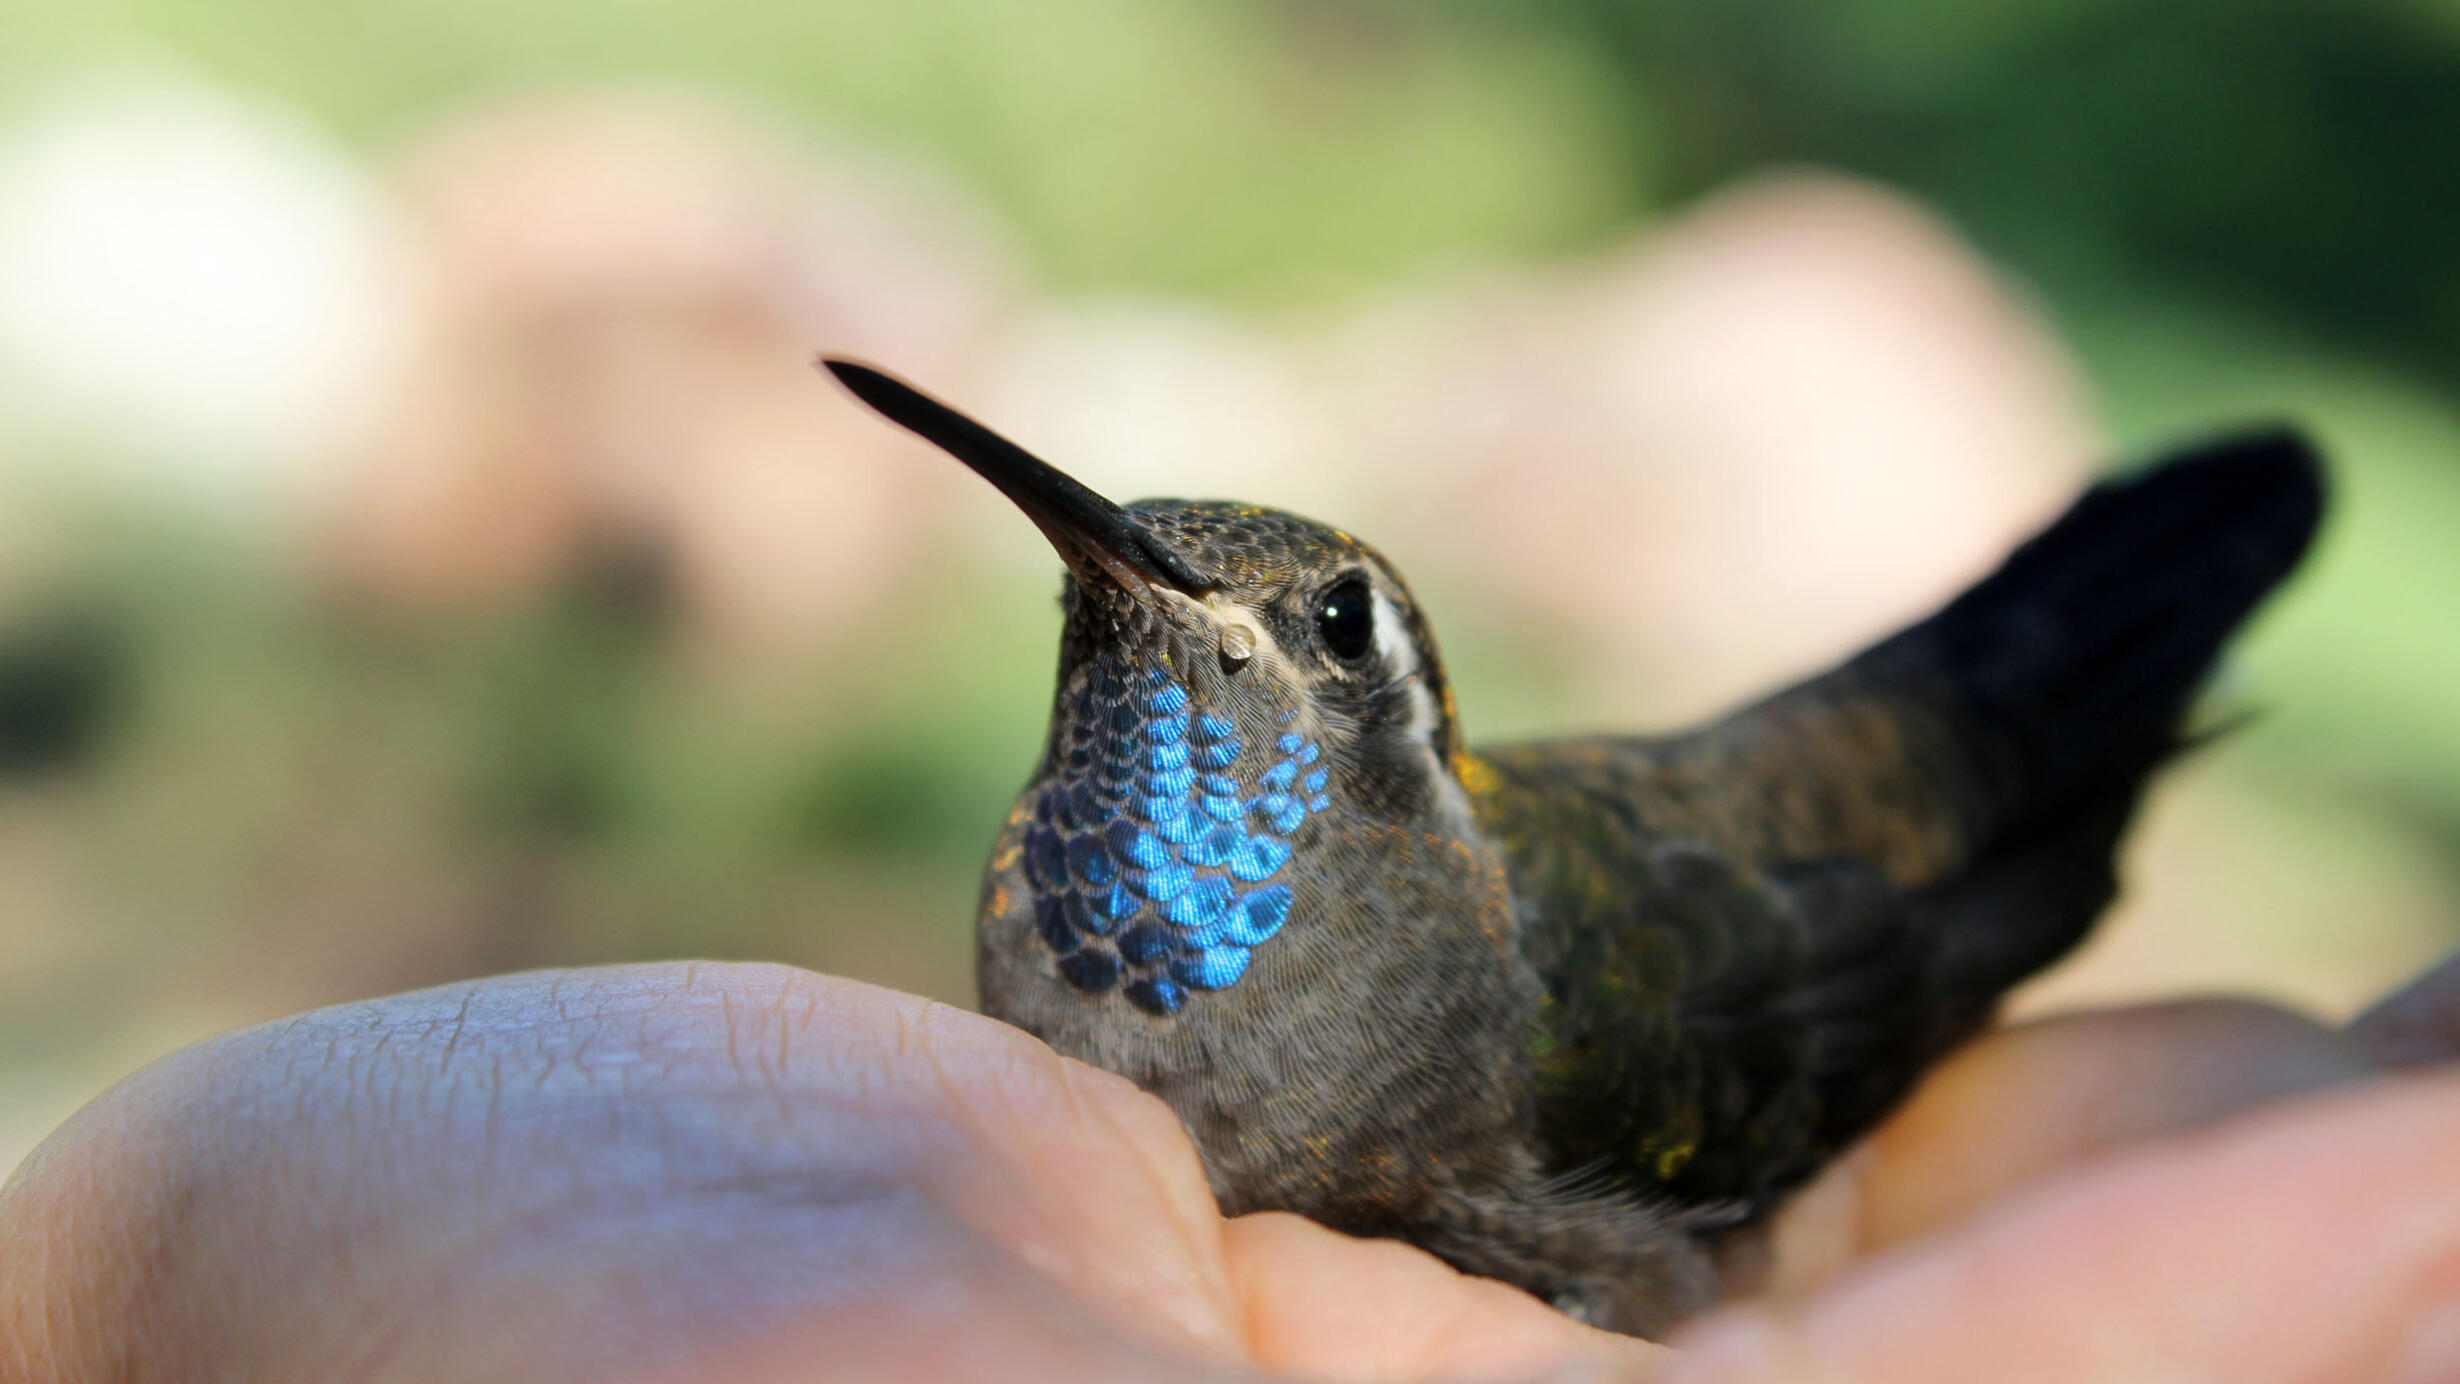 Closeup of a hummingbird resting on the open palm of a human hand.